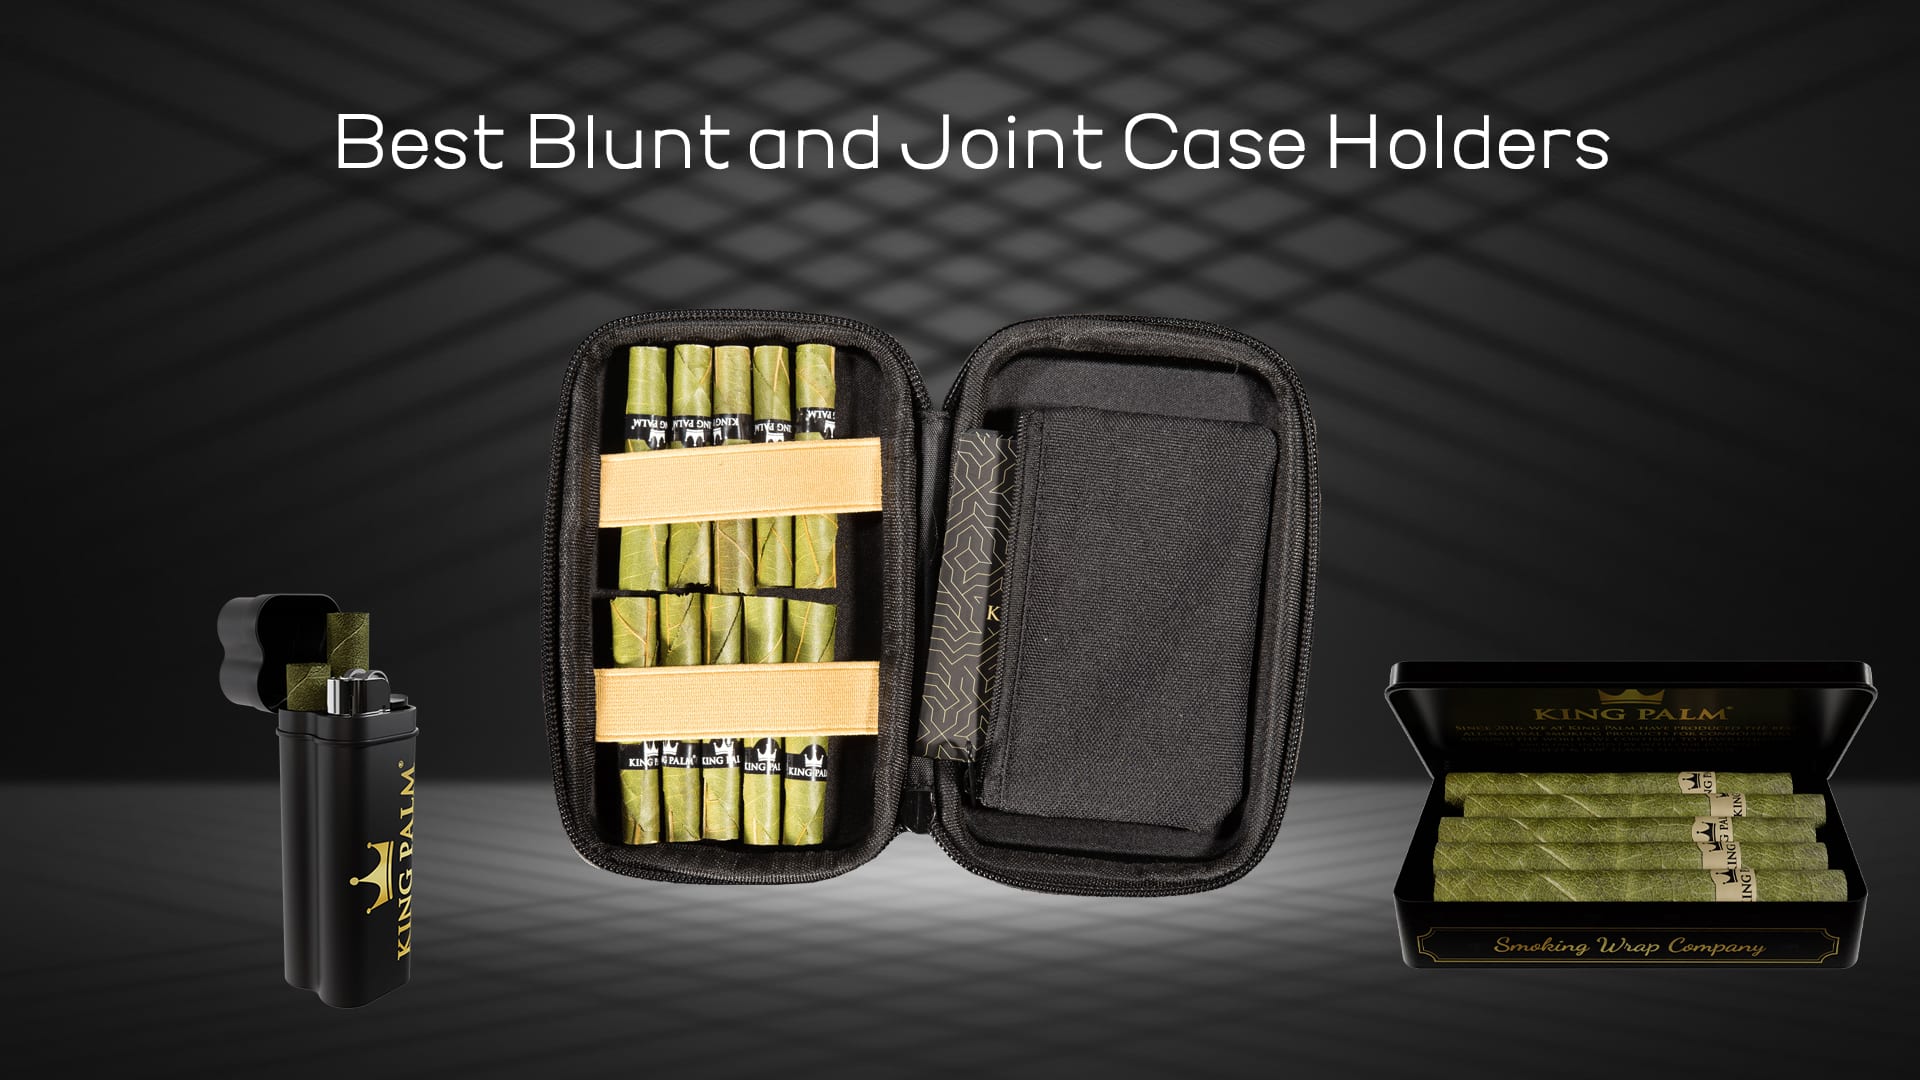 The Best Blunt and Joint Case Holders